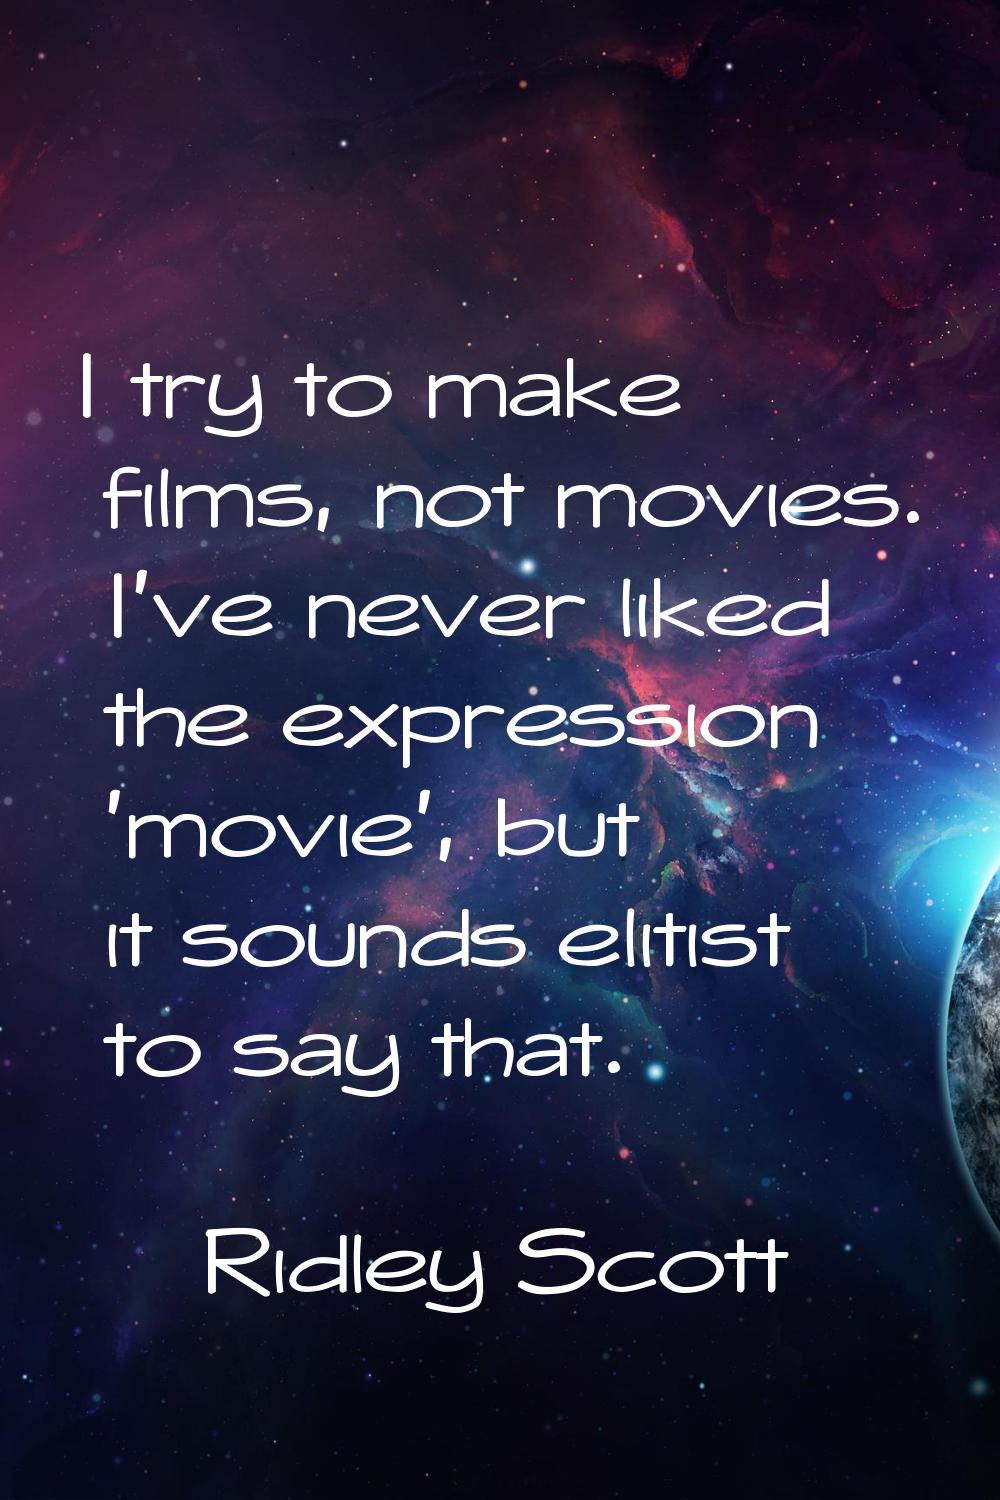 I try to make films, not movies. I've never liked the expression 'movie', but it sounds elitist to 